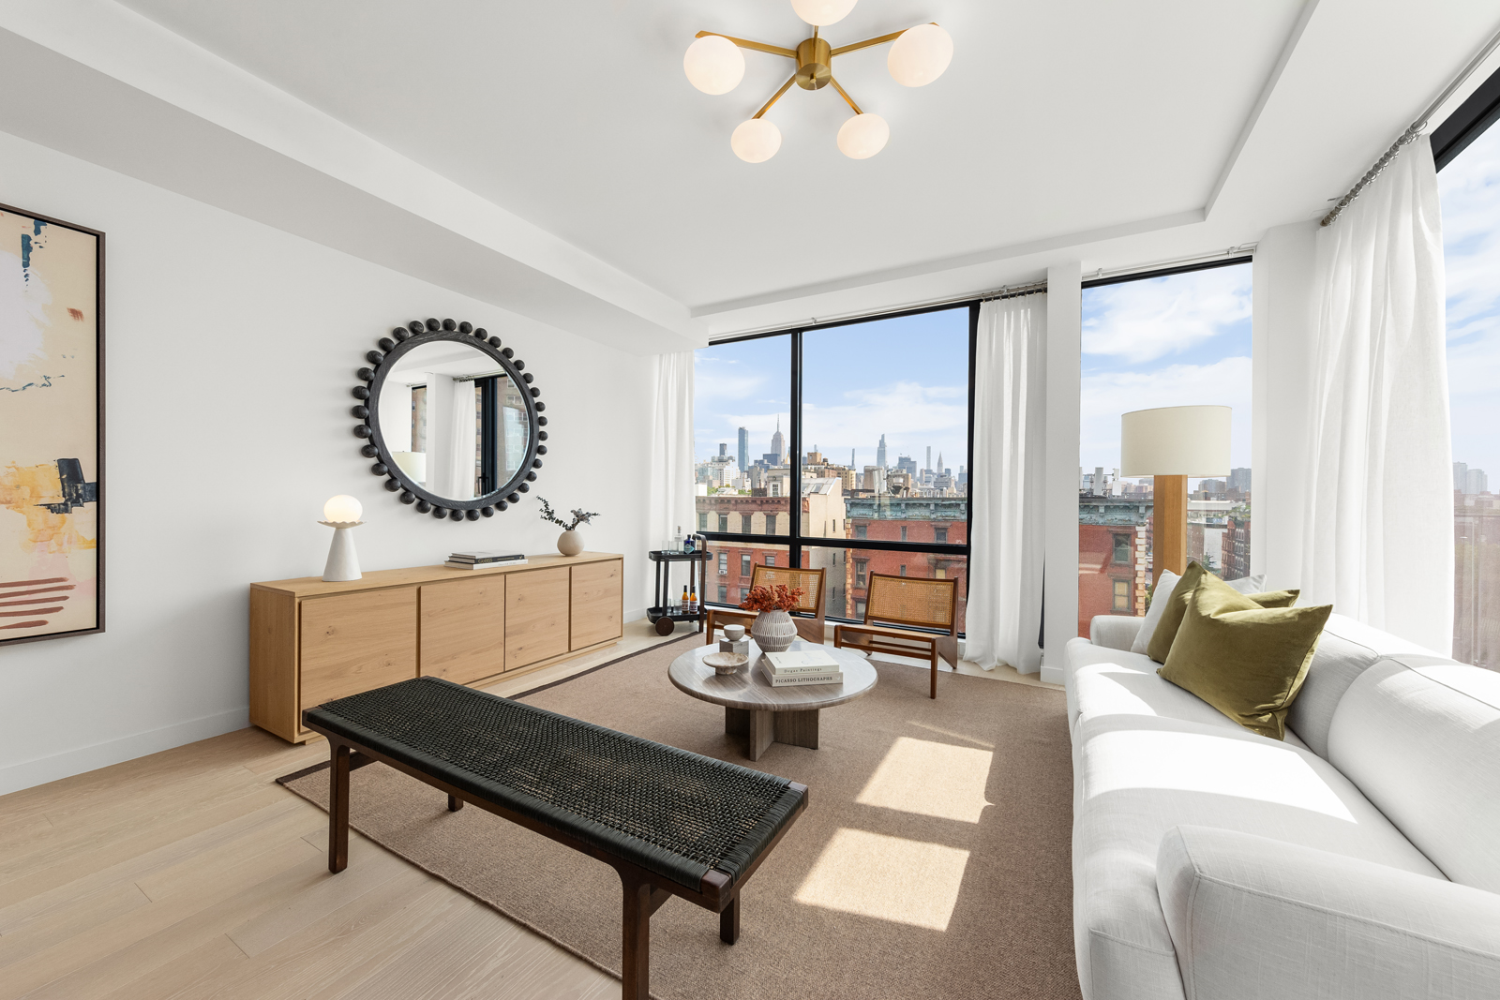 75 1st Avenue 7A, East Village, Downtown, NYC - 2 Bedrooms  
2 Bathrooms  
4 Rooms - 